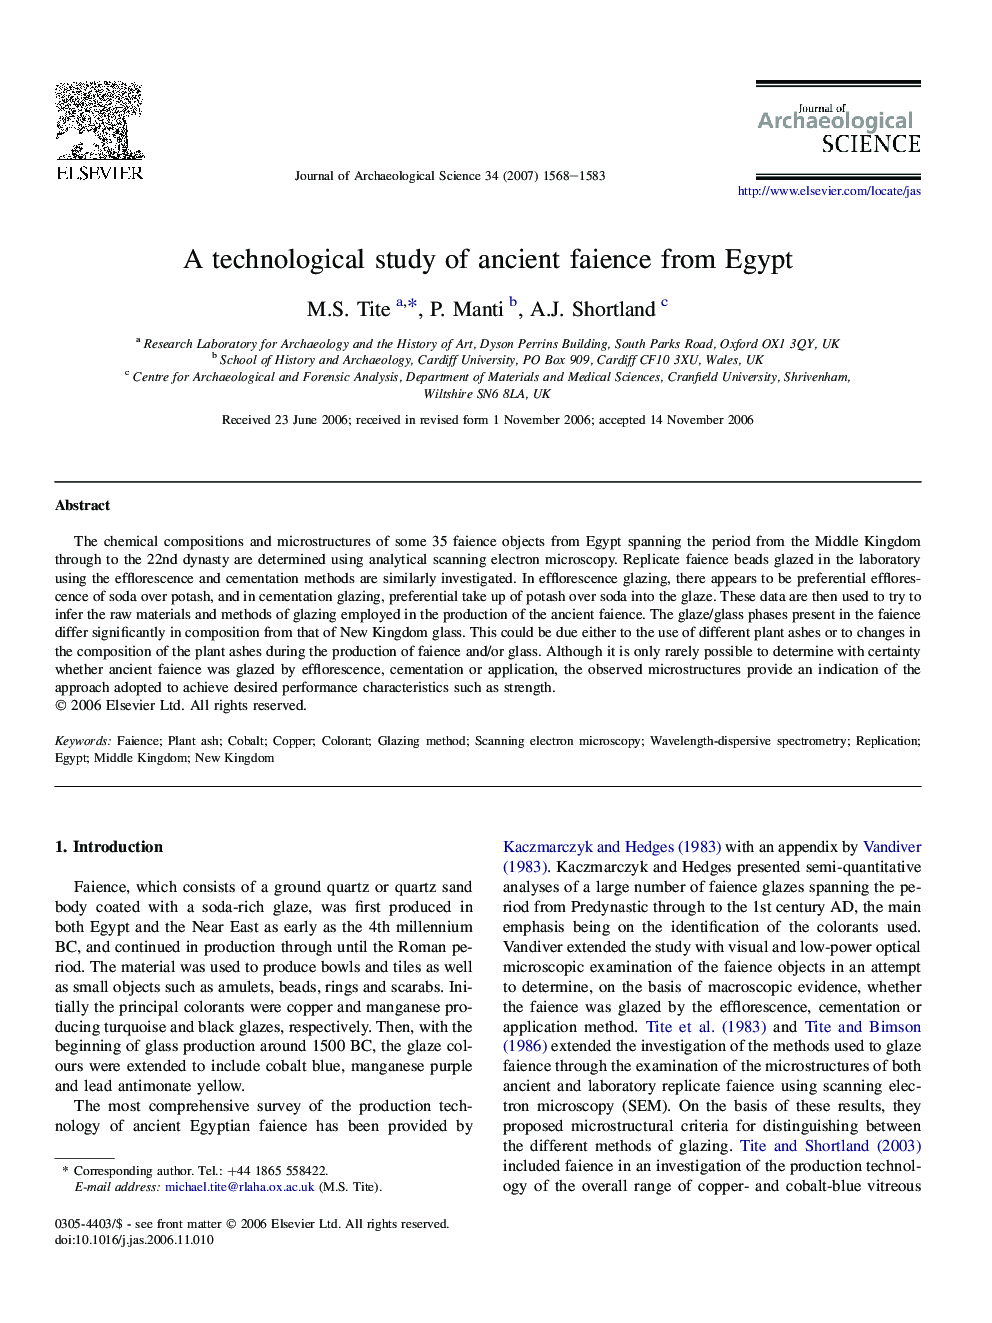 A technological study of ancient faience from Egypt